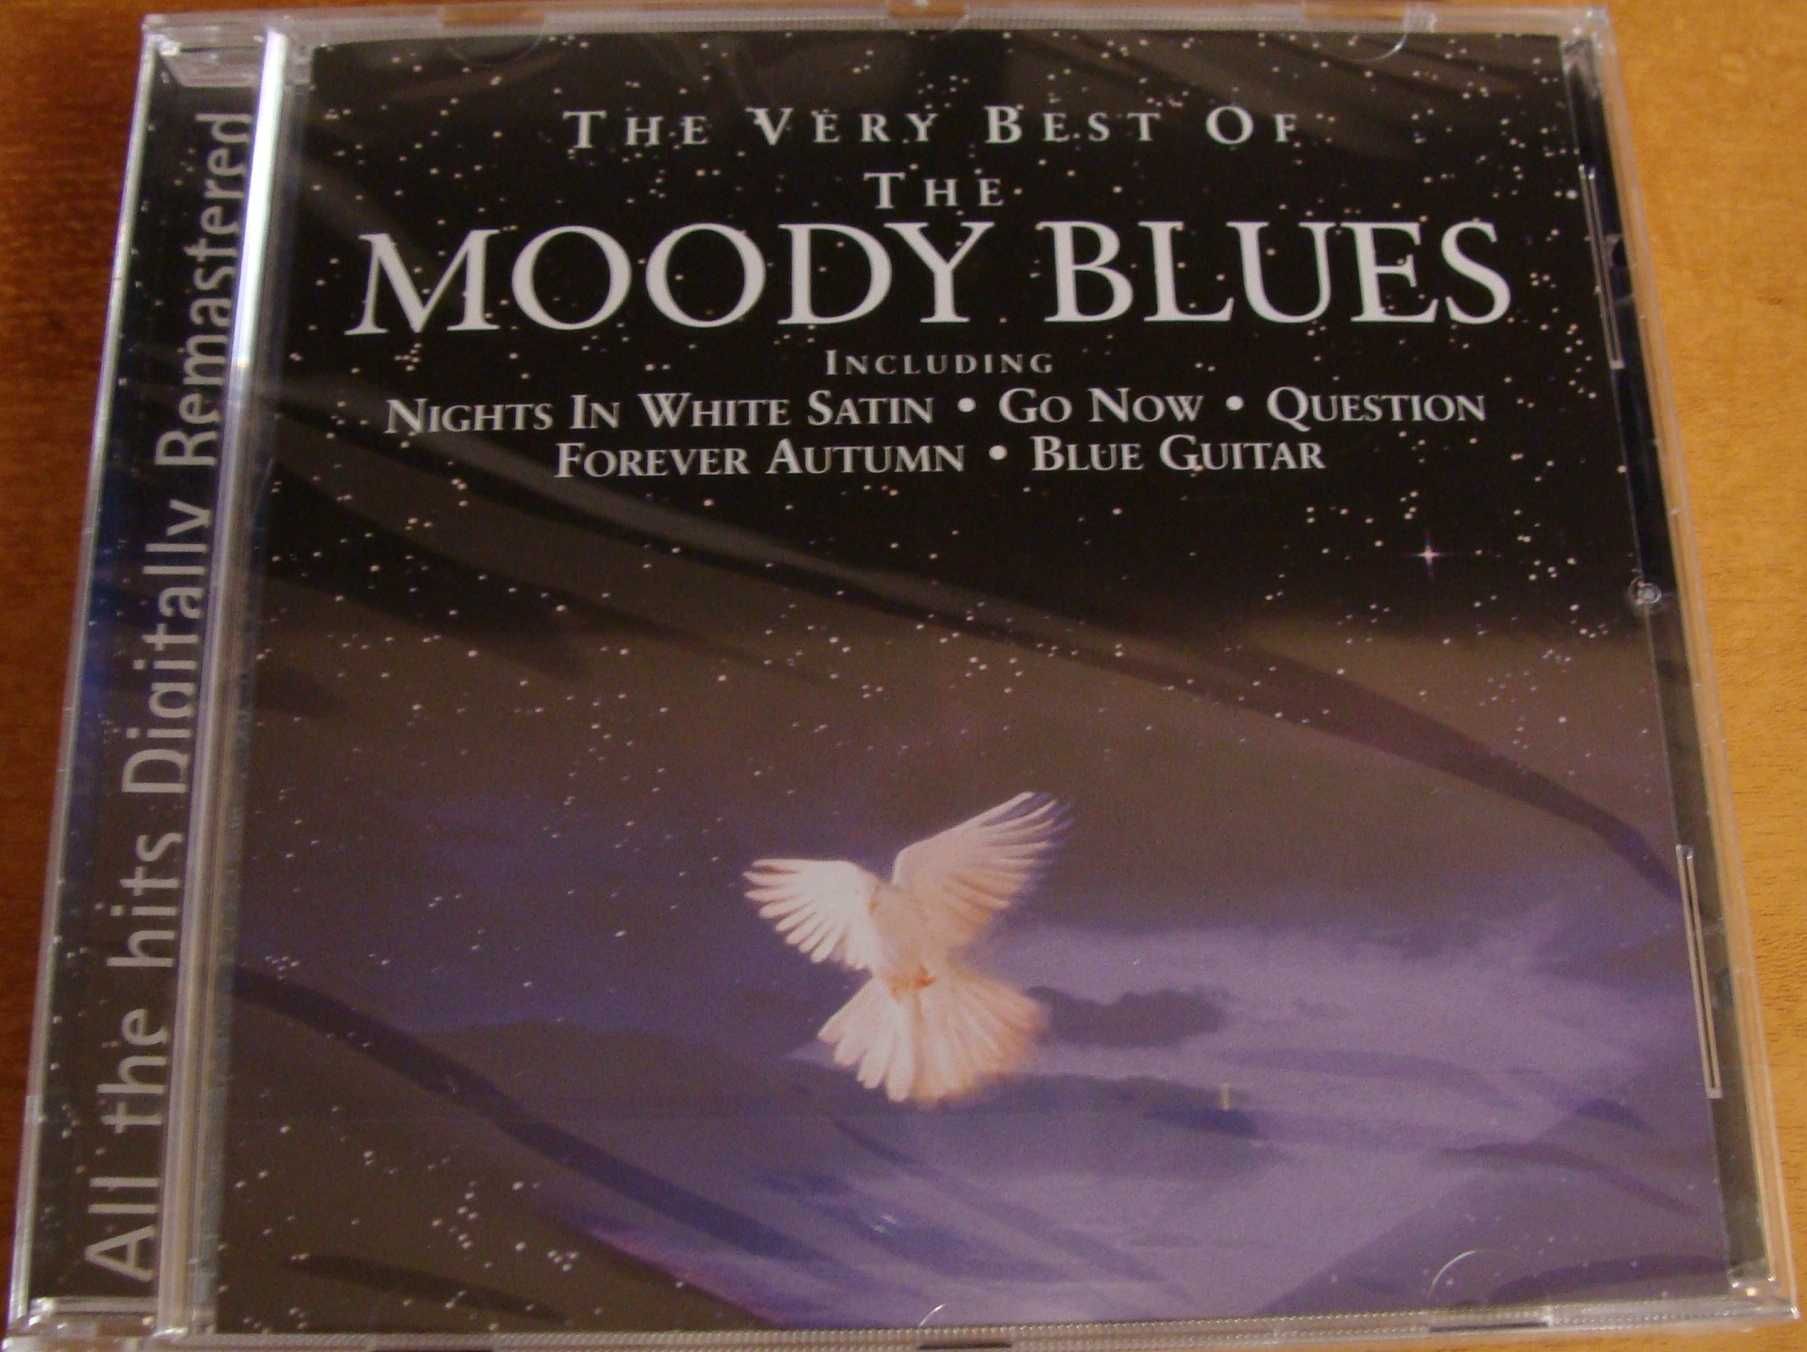 The MOODY BLUES - The Best of The Moody Blues / CD